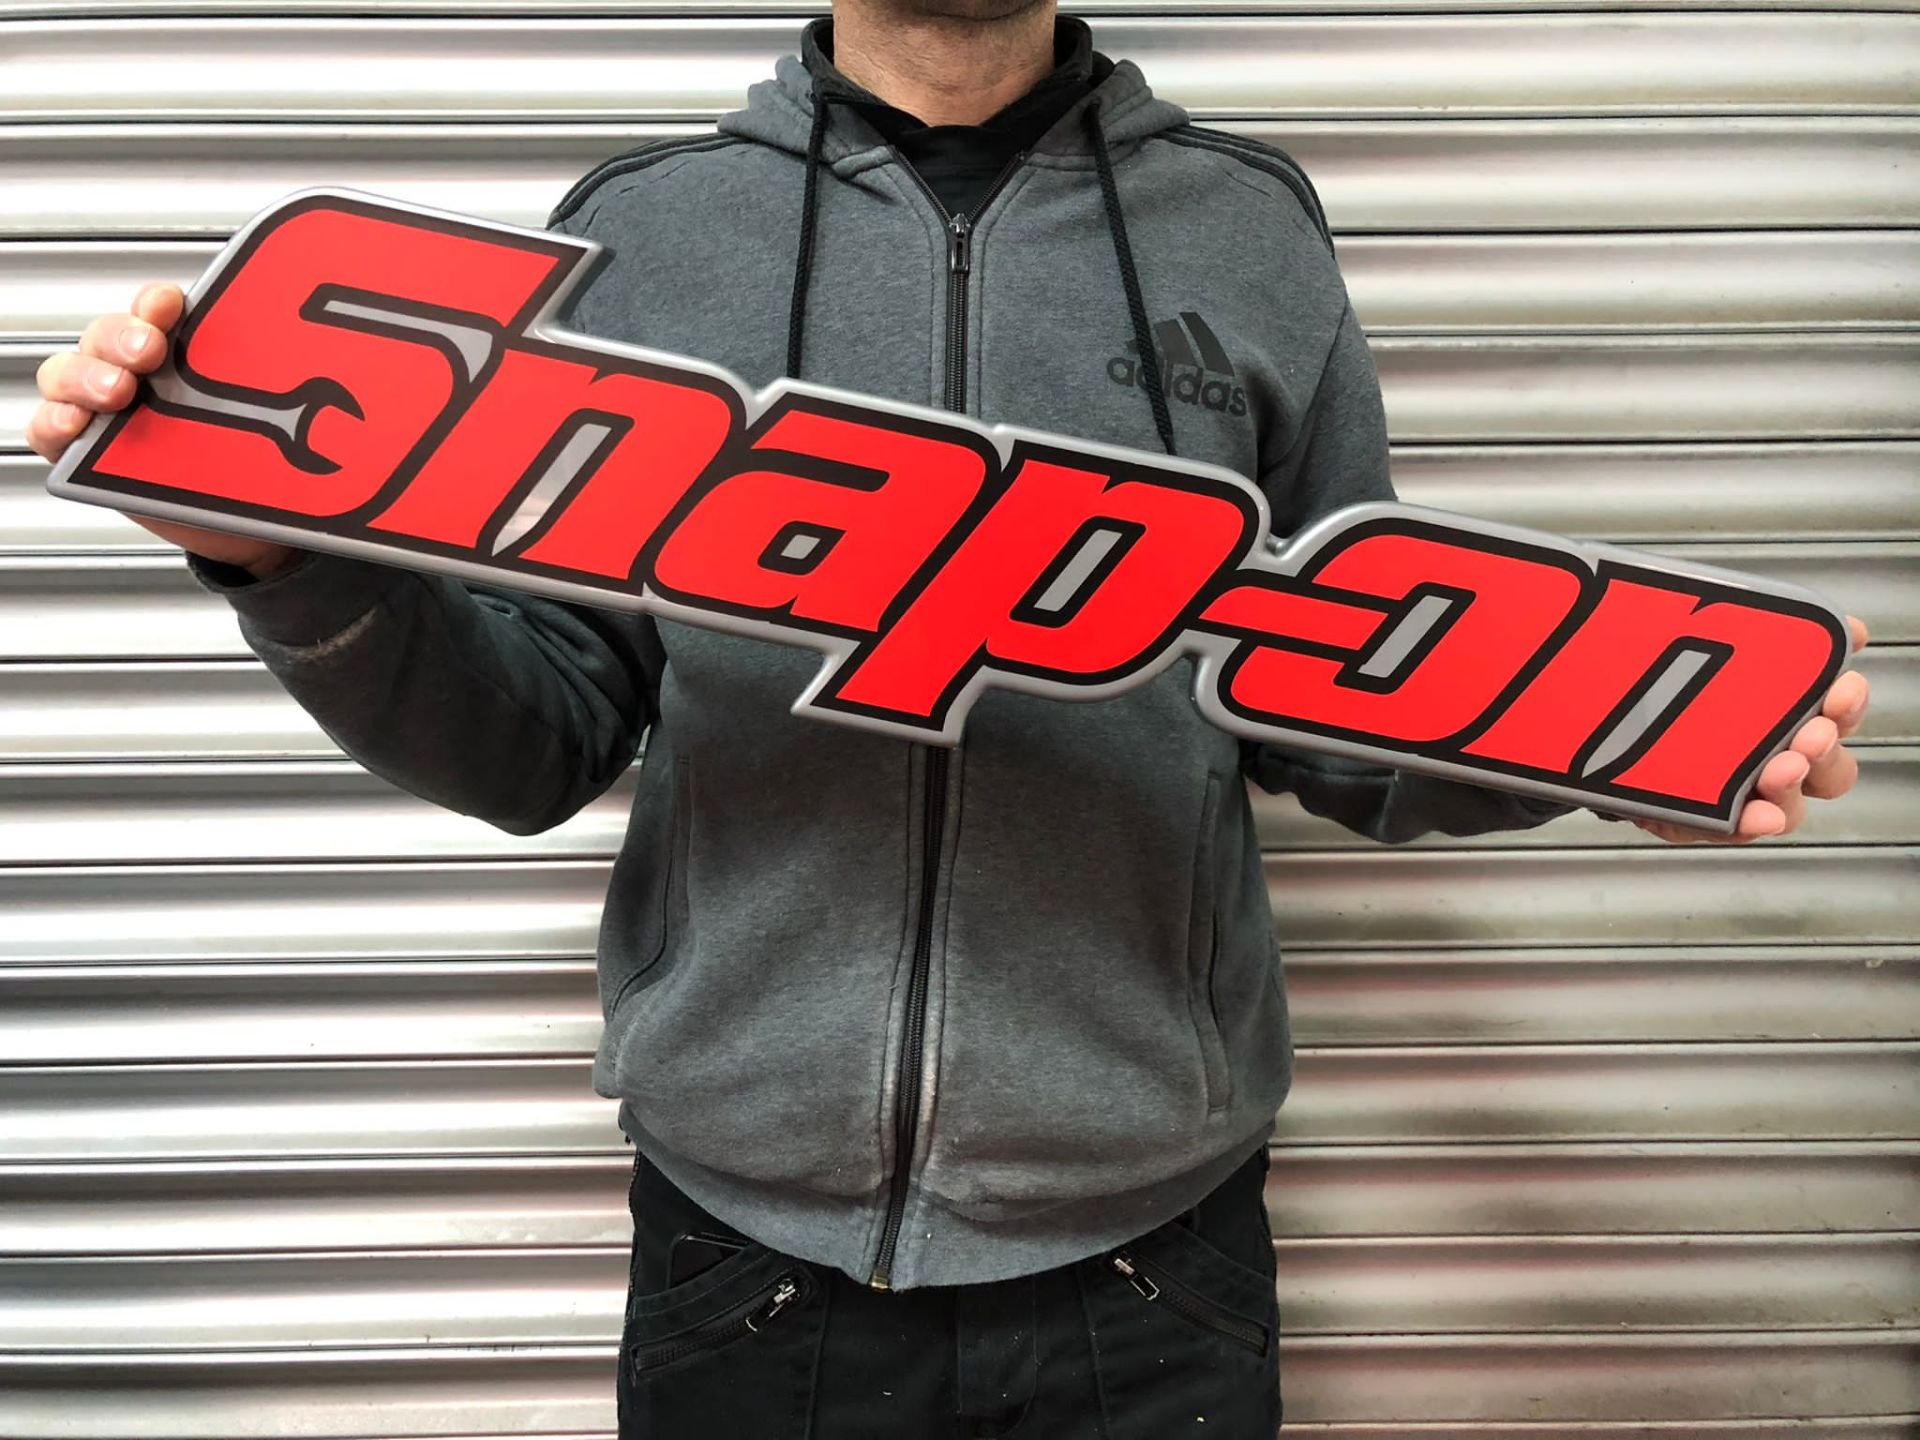 Snap-on sign - Image 3 of 3